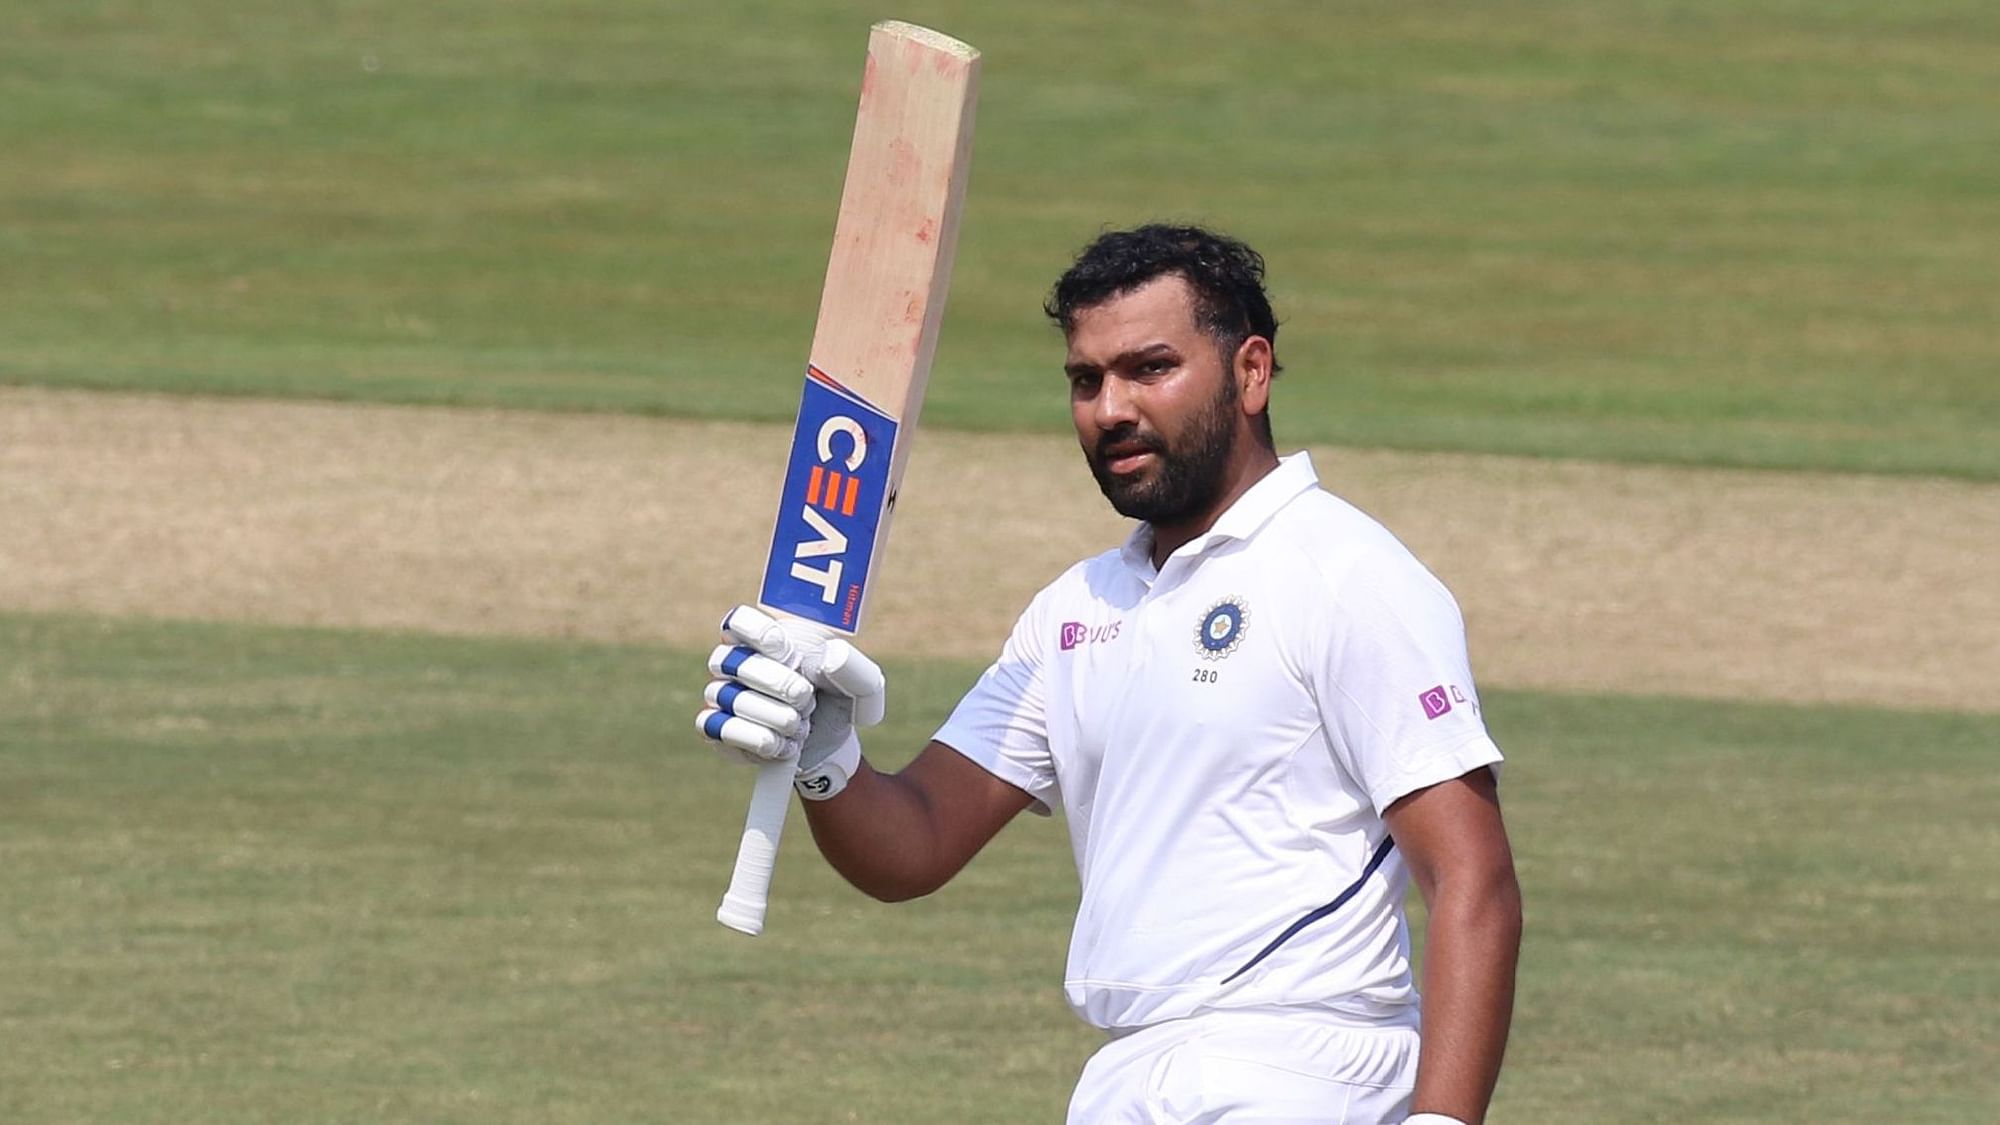 Rohit Sharma scored a century in the first Test against South Africa.